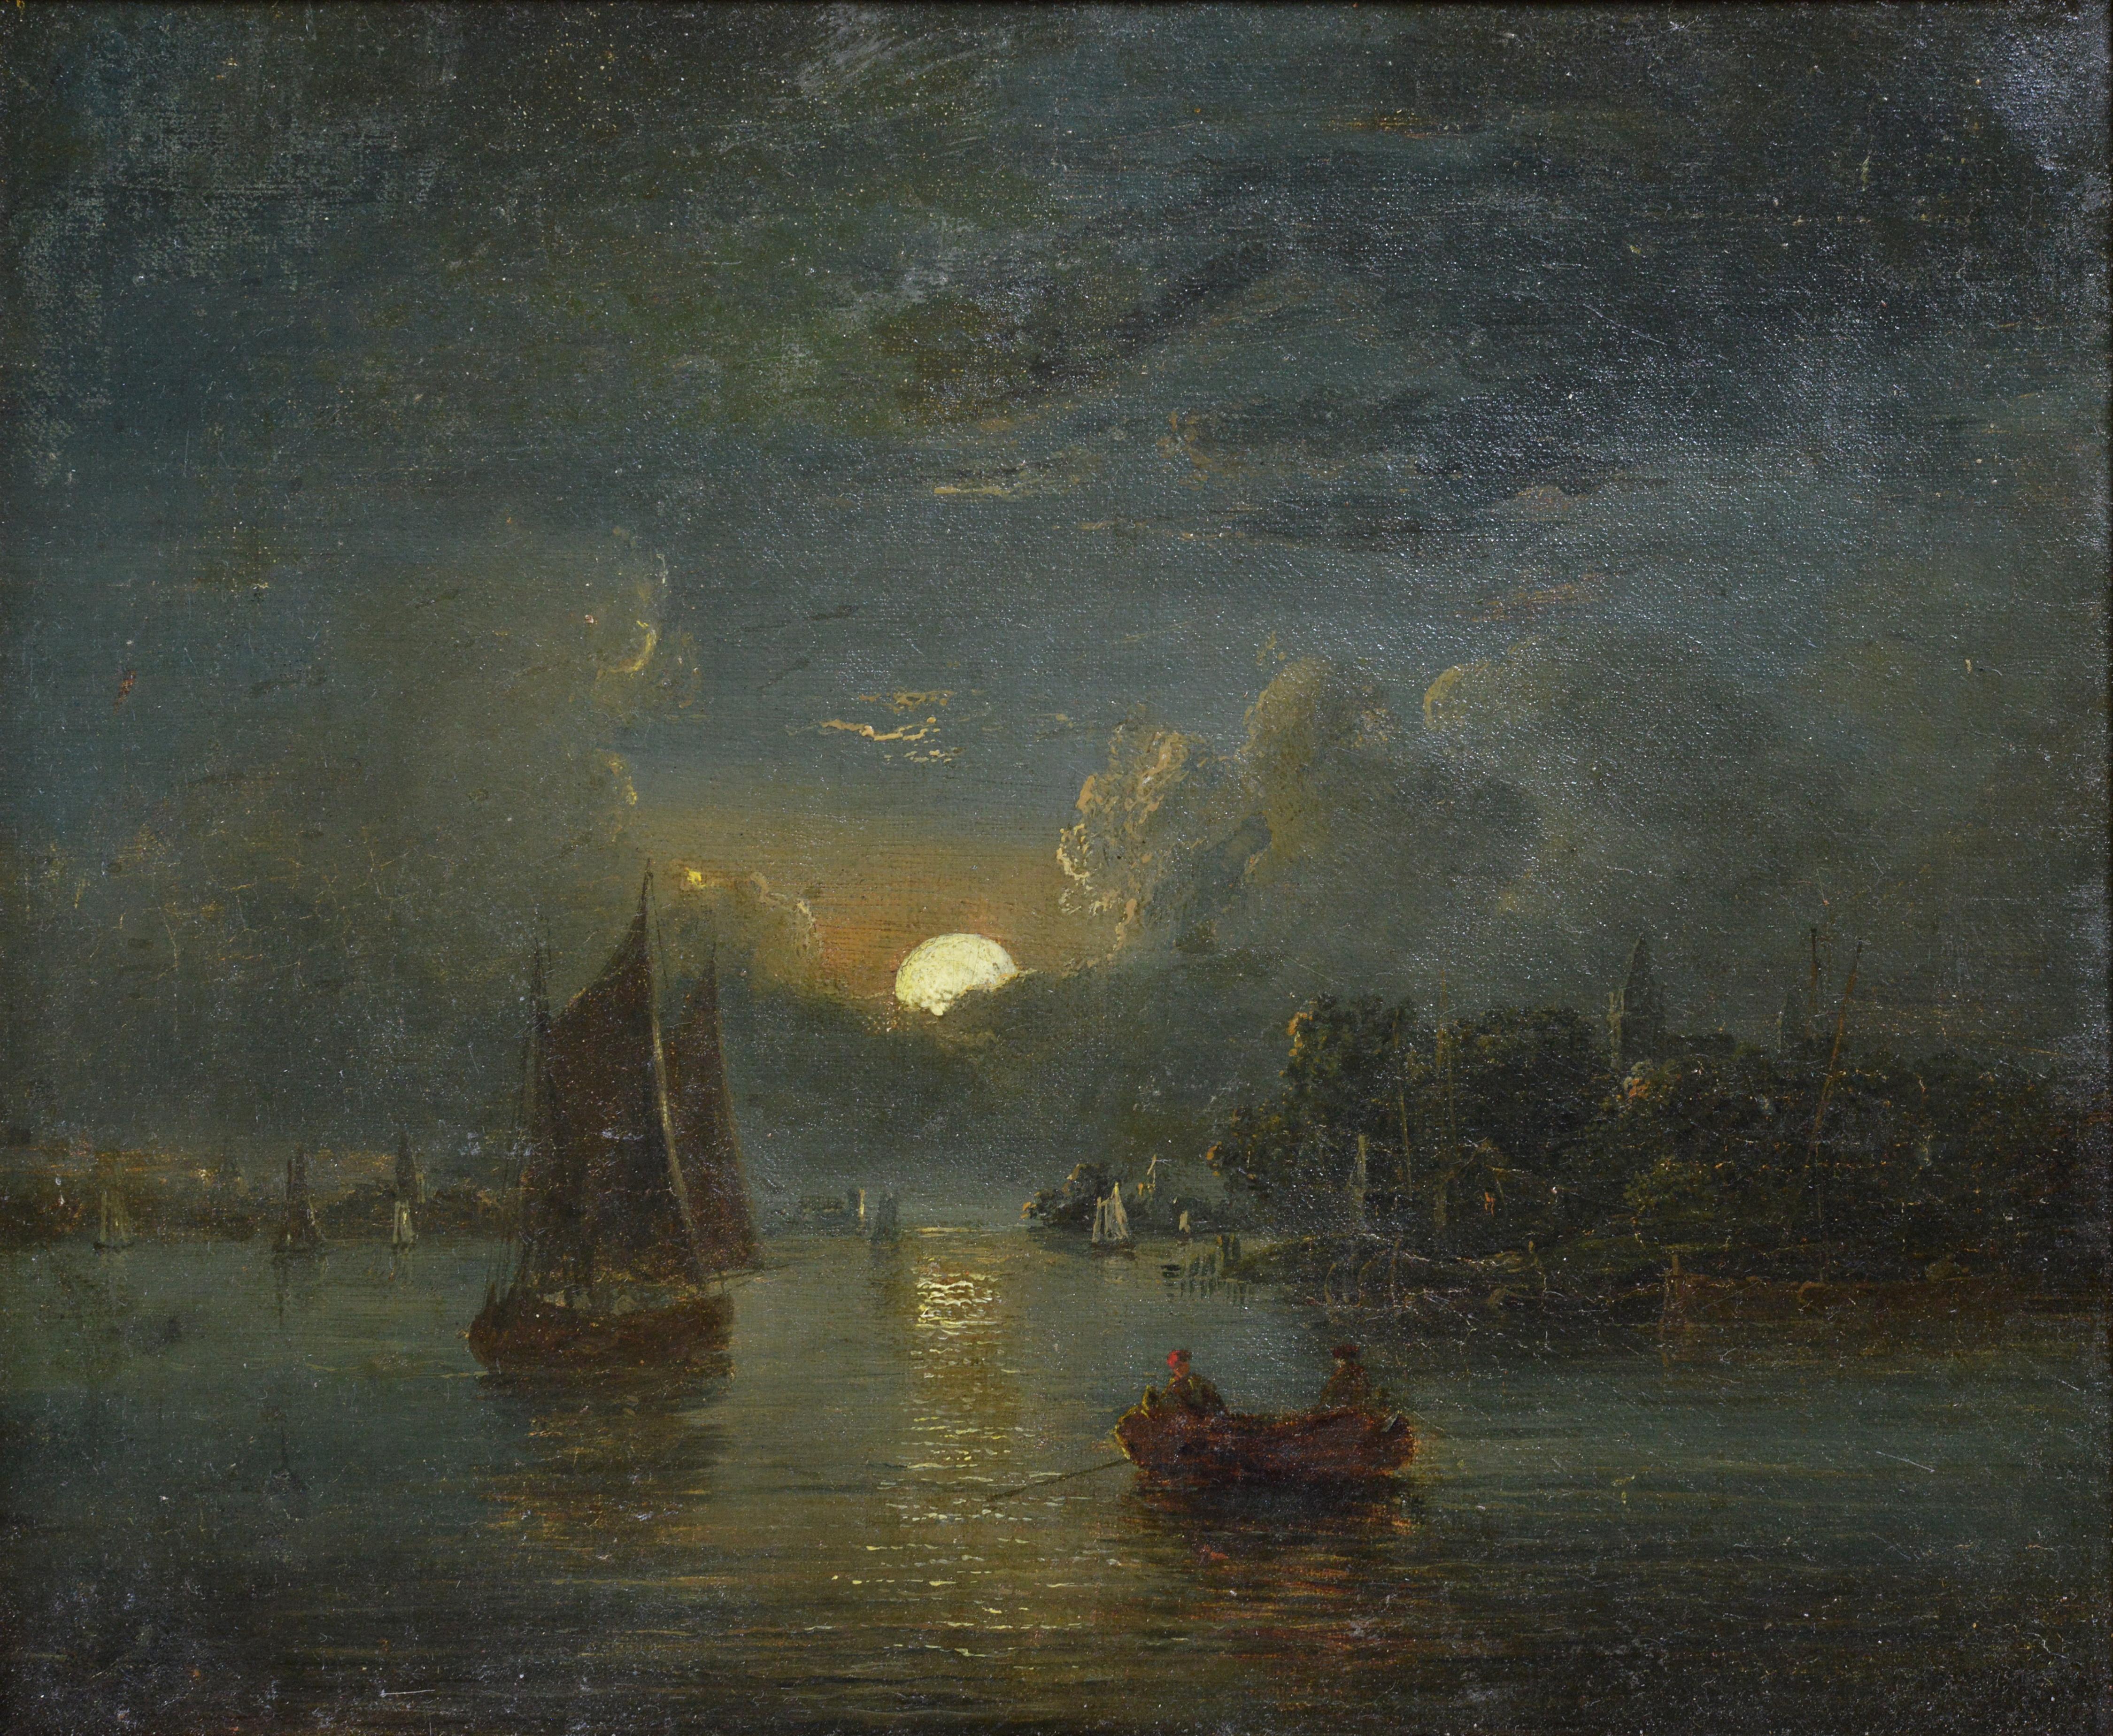 British seascape Fishing boats in moonlight 19th century Oil painting Signed - Painting by John Berney Crome